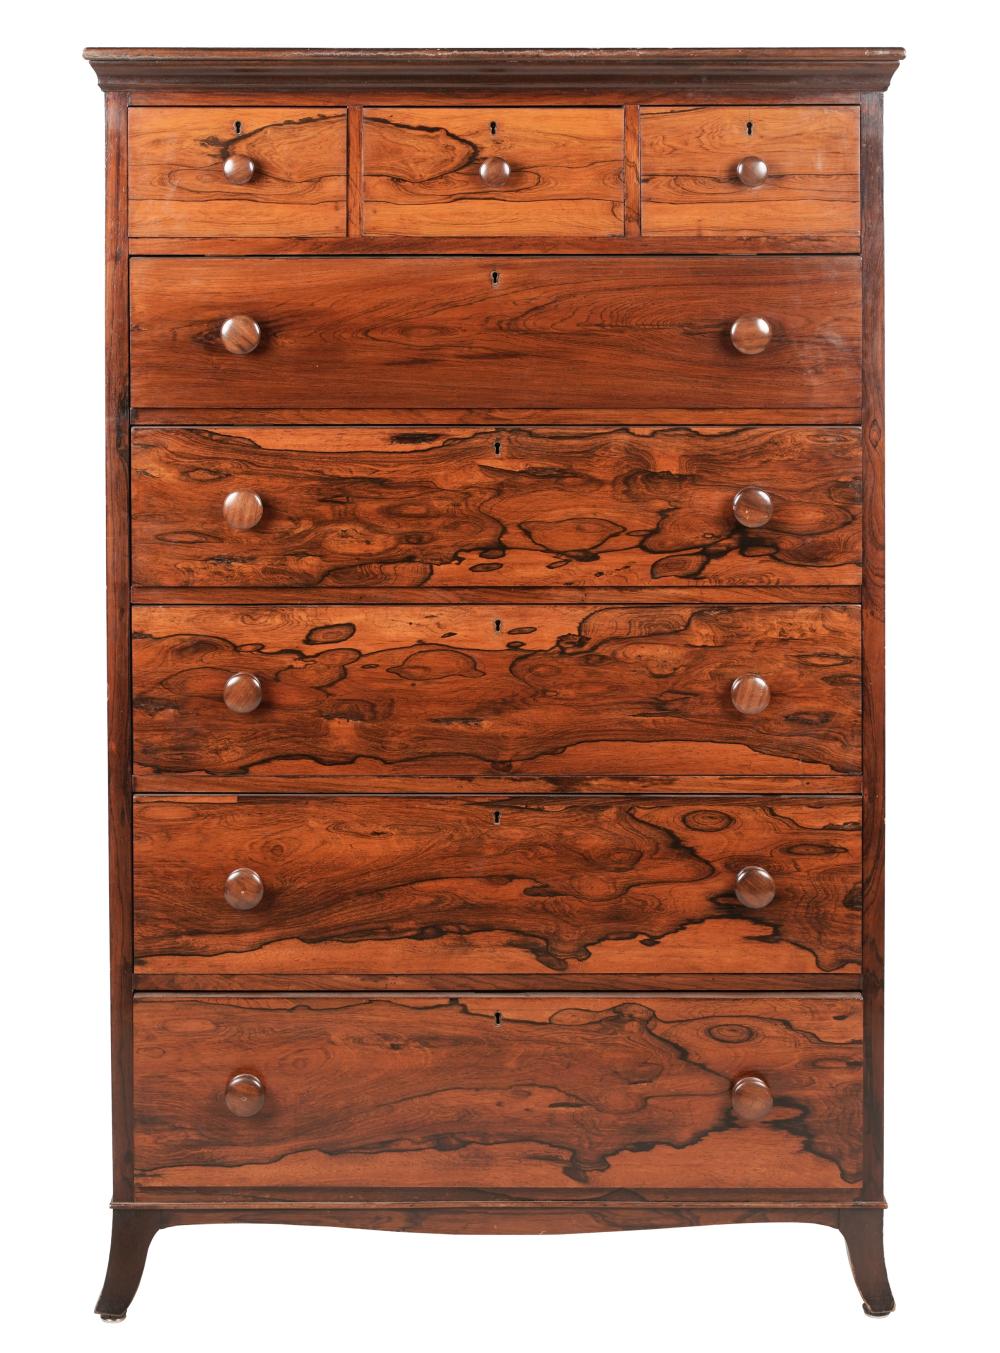 ROSEWOOD TALL CHEST OF DRAWERSlate